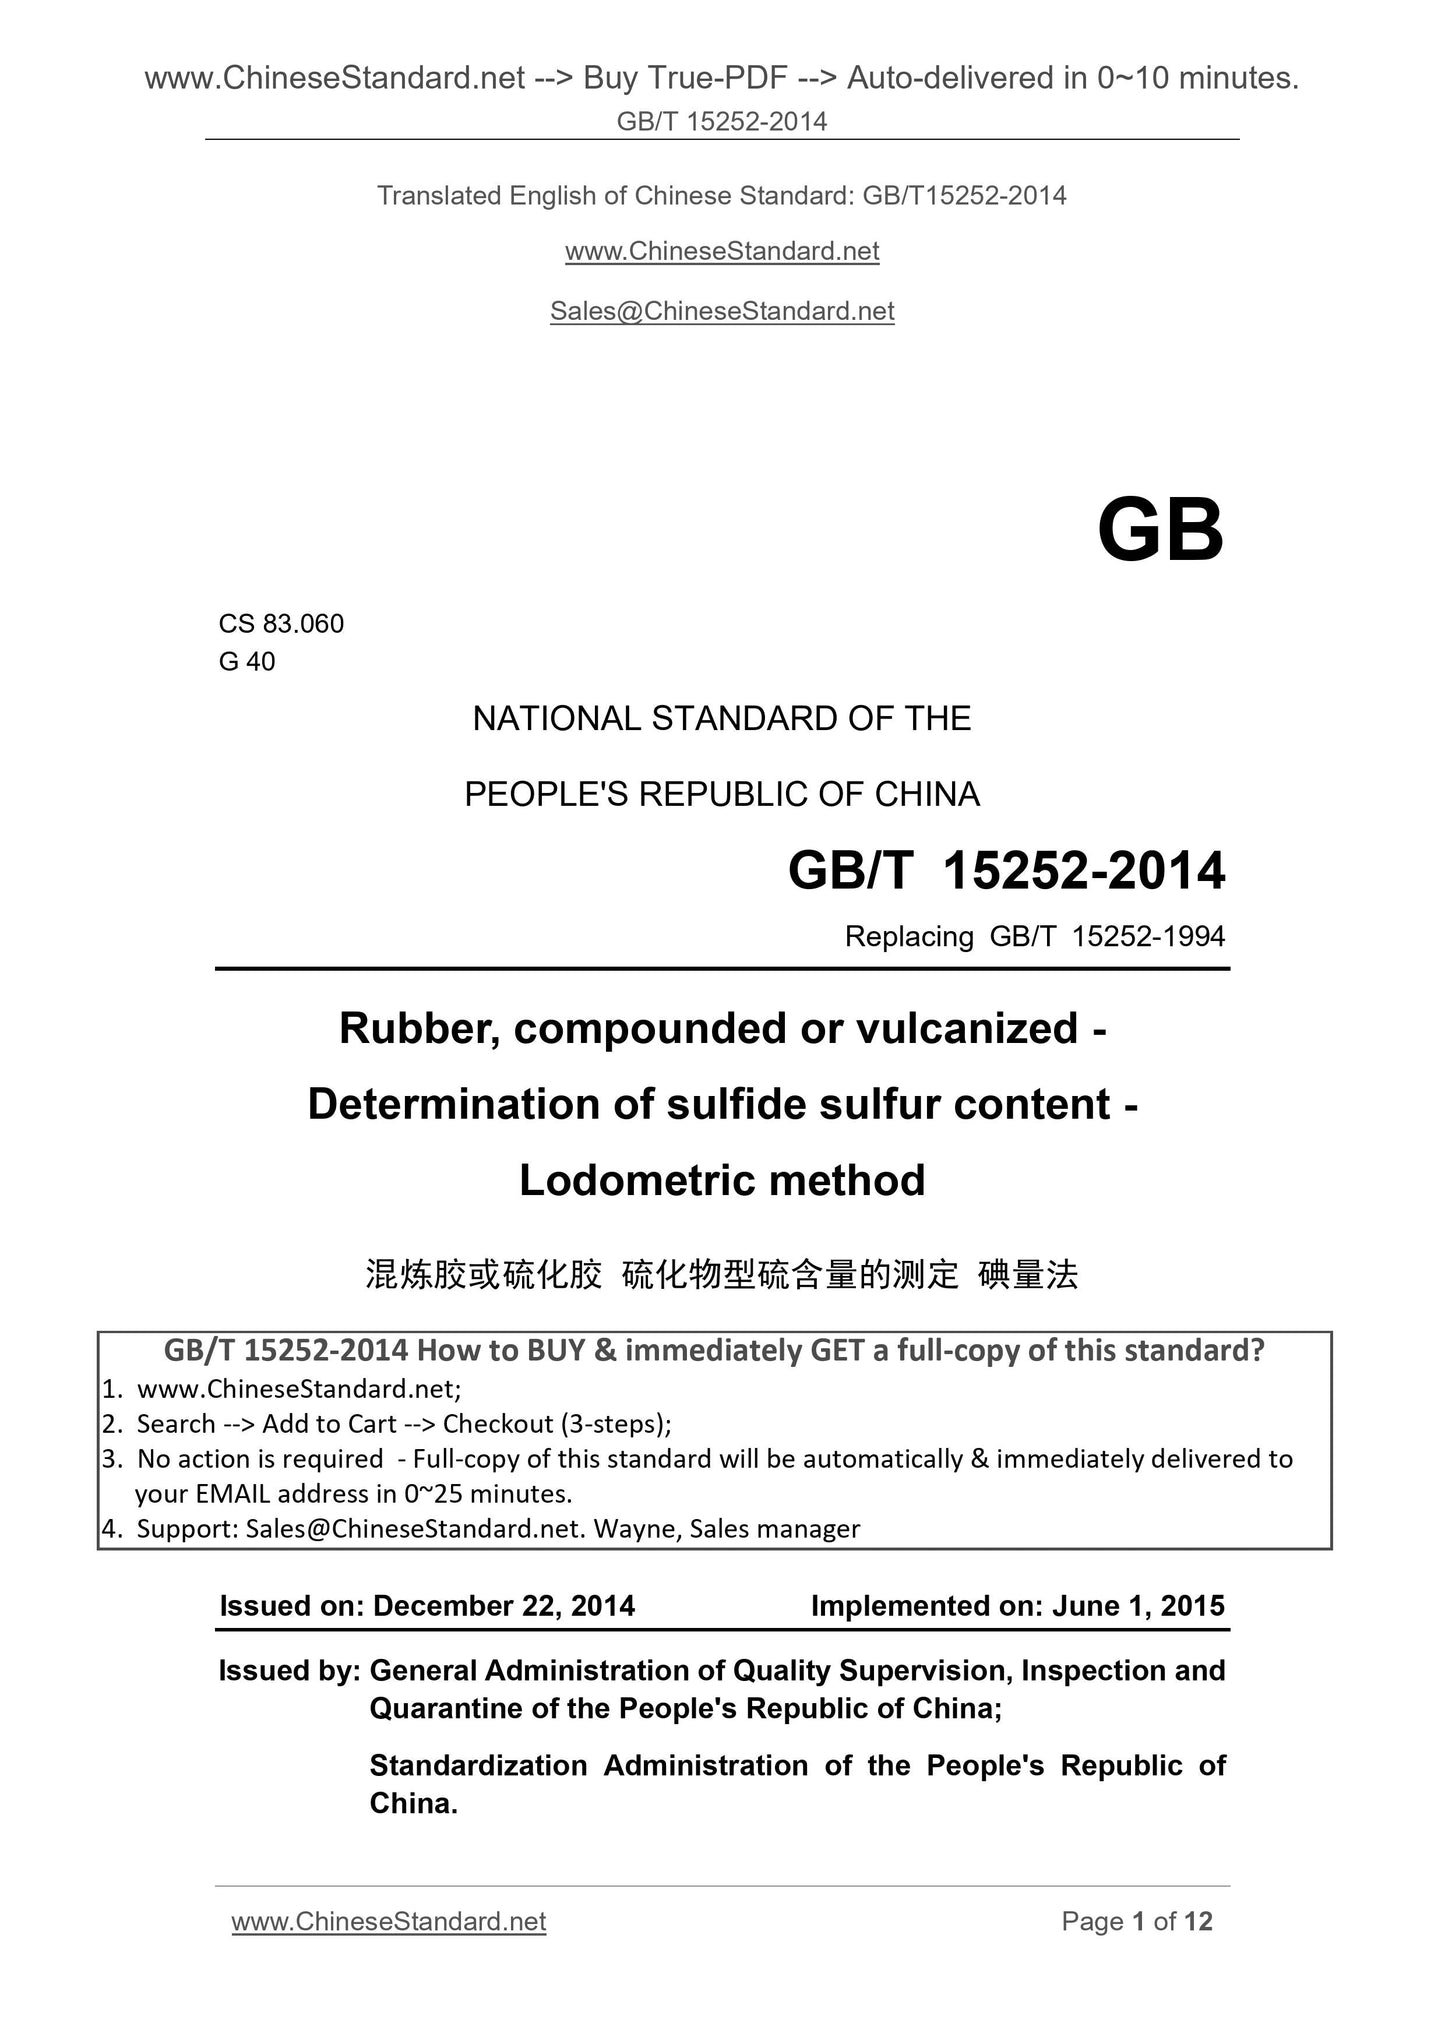 GB/T 15252-2014 Page 1